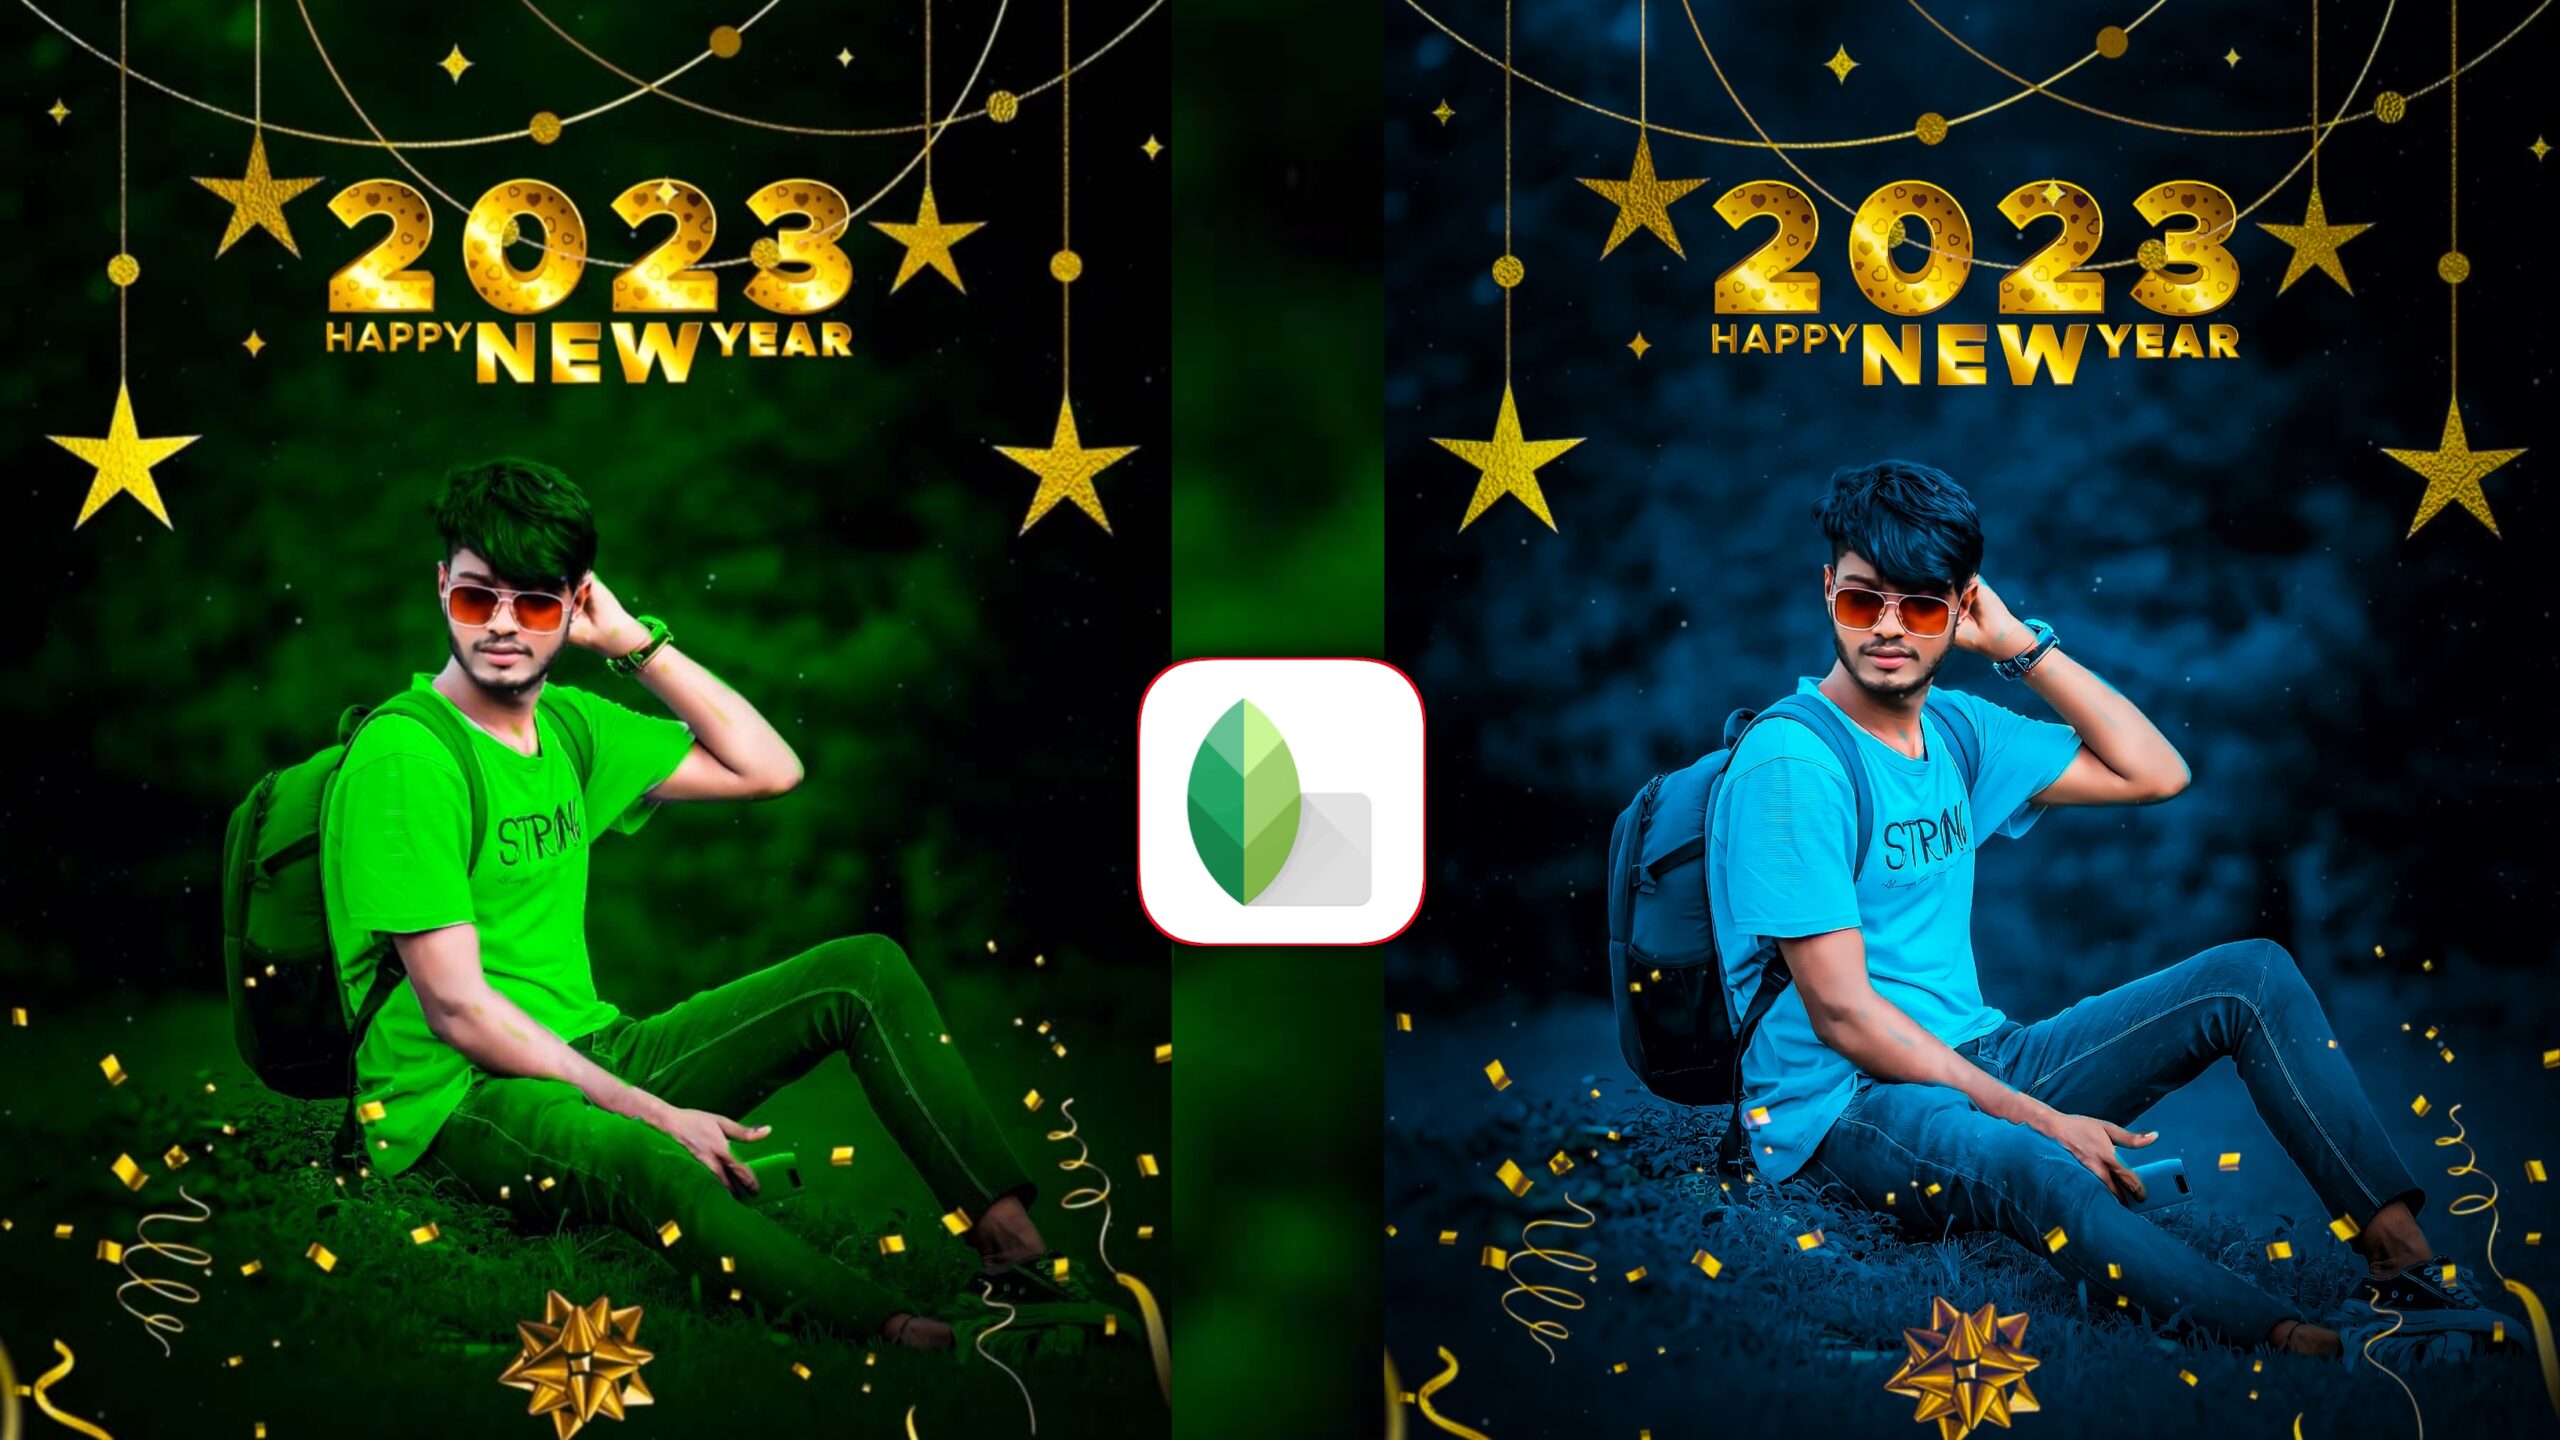 2023 Happy New Year Photo Editing Download Background & png